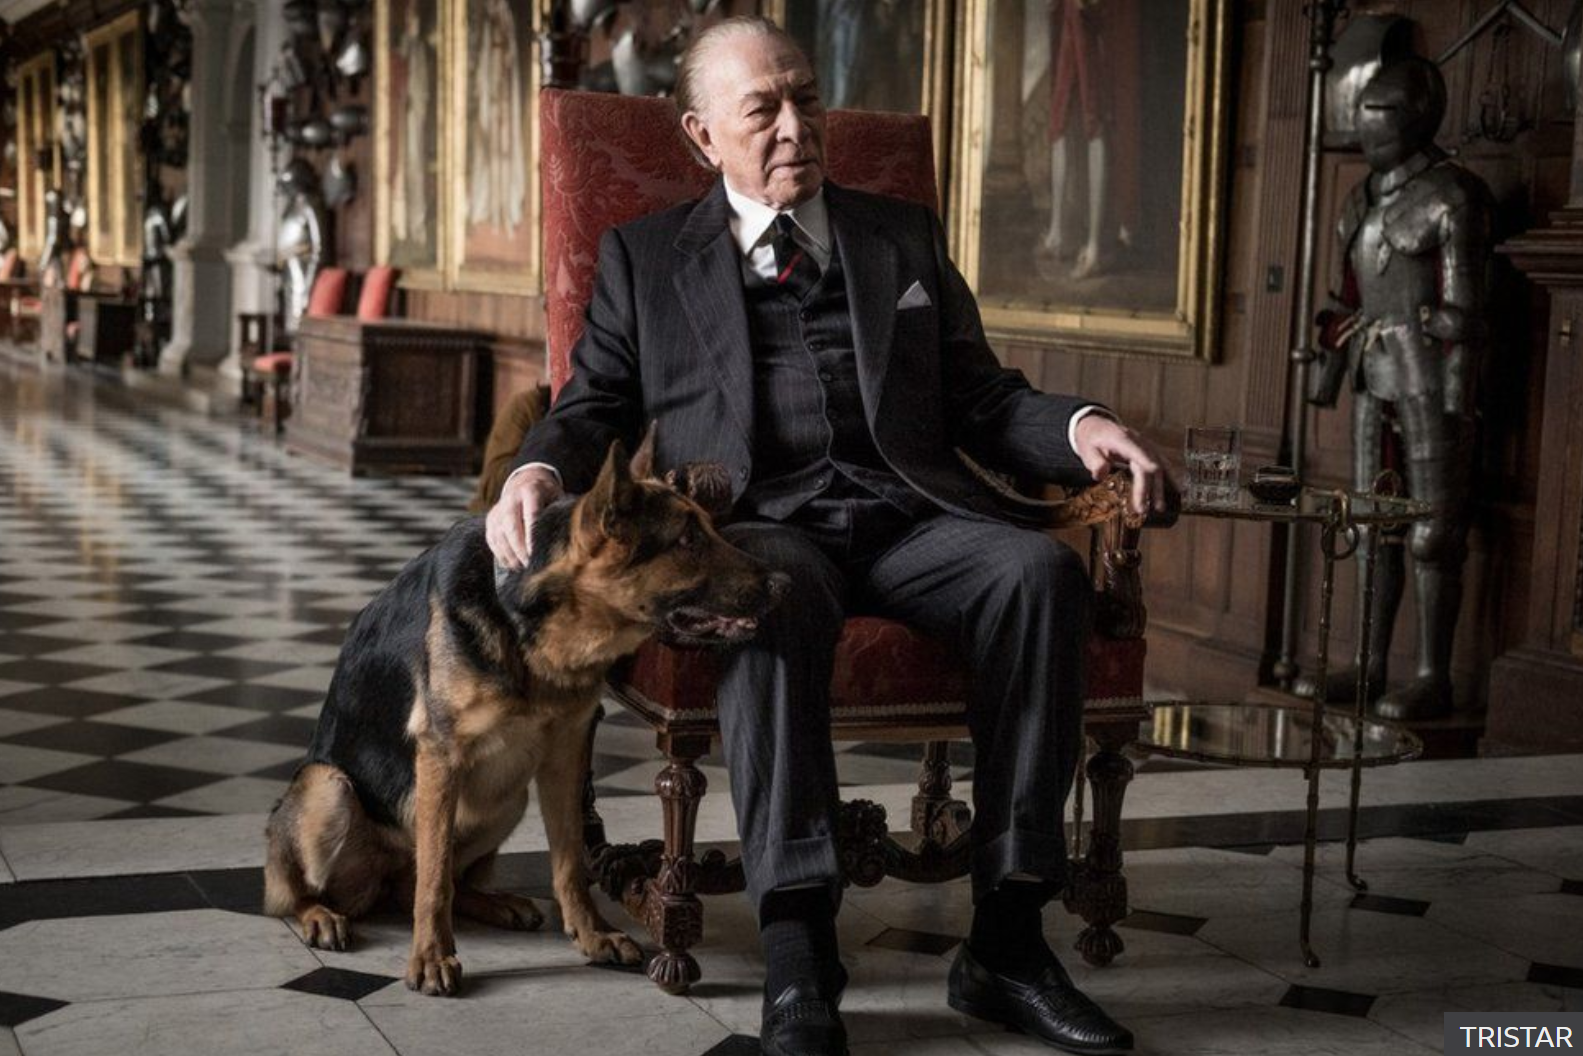 Plummer played Paul  Getty in All The Money in the World